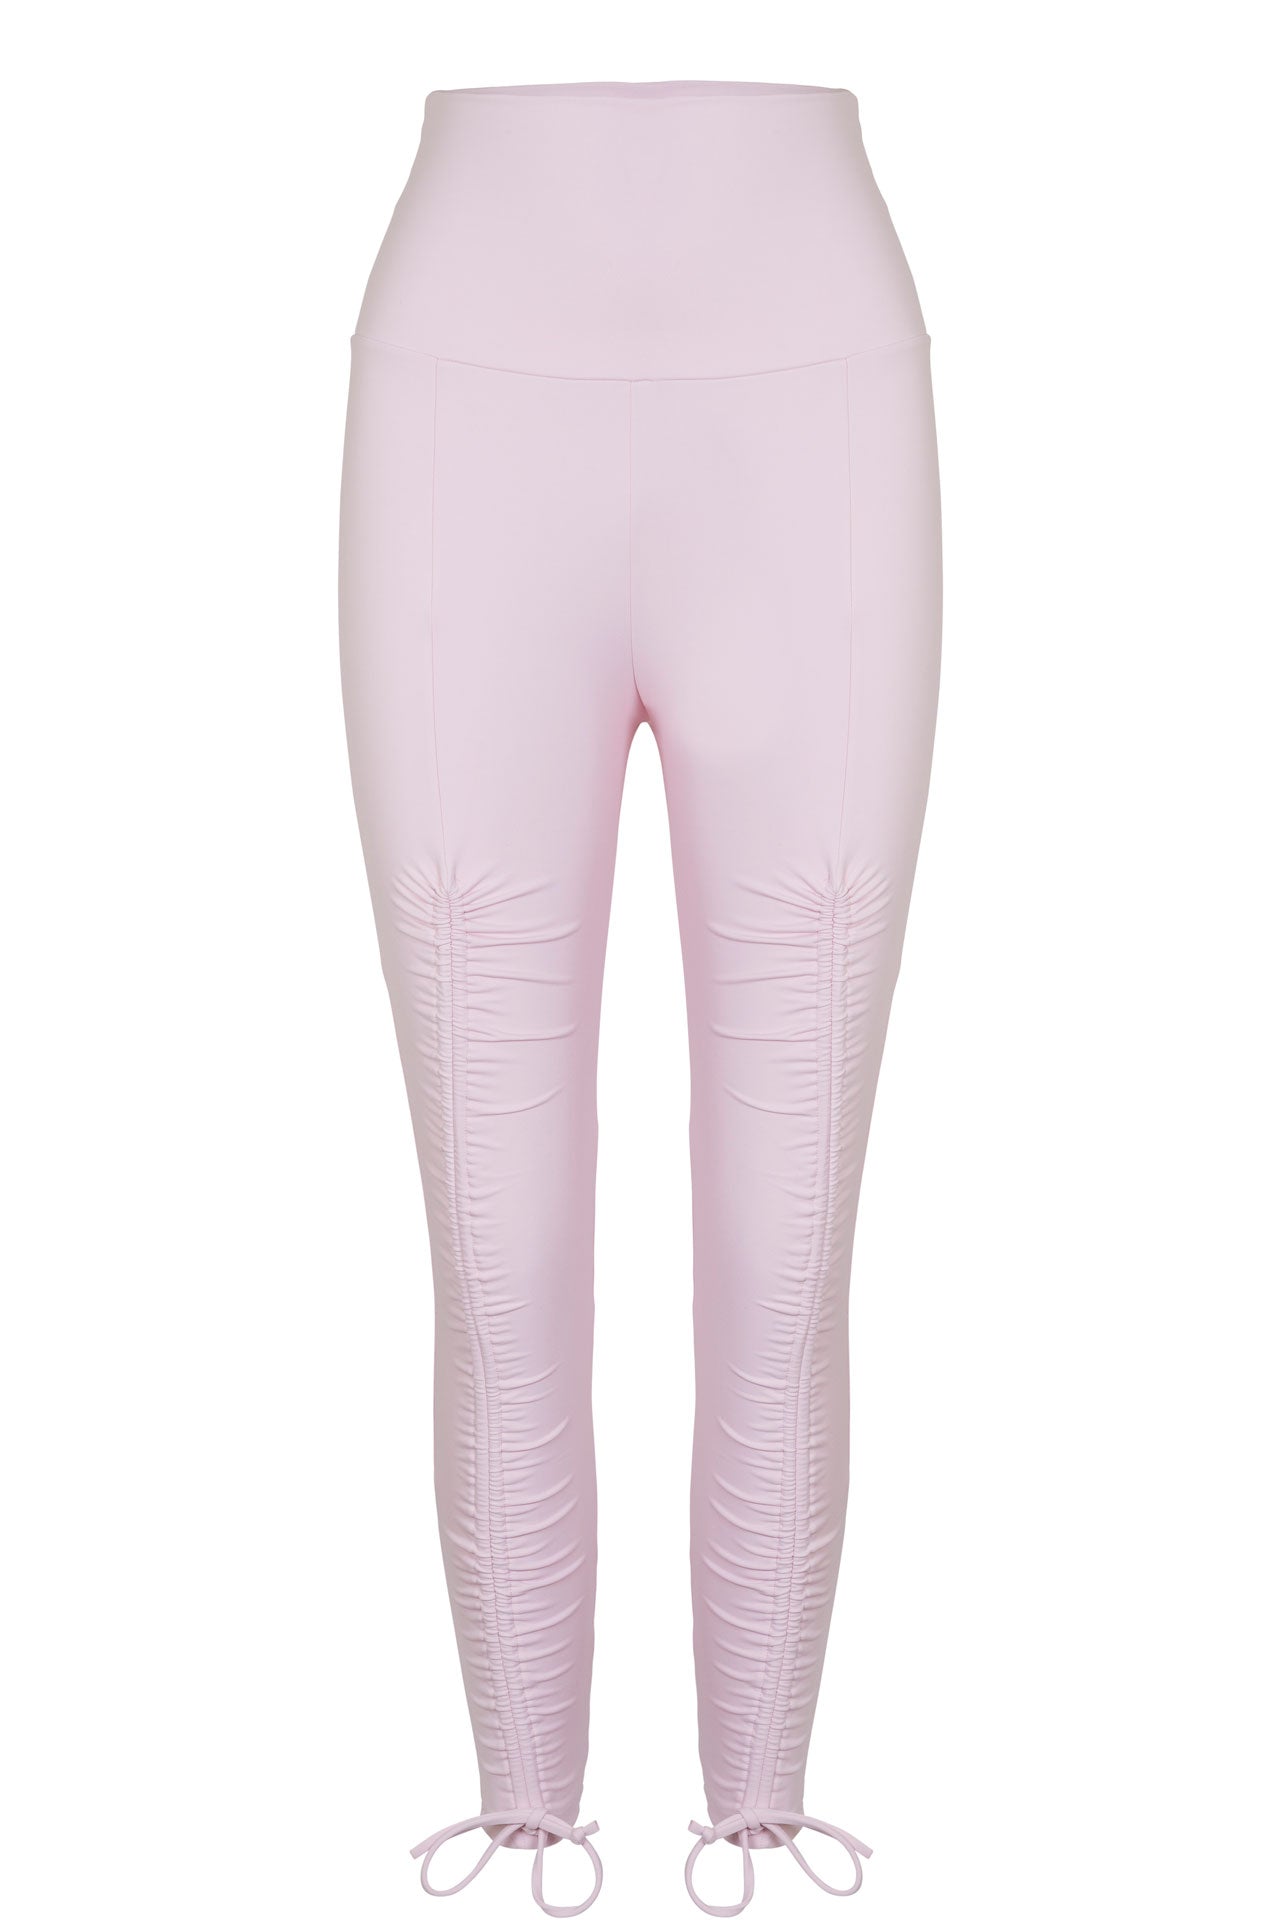 Buy Pink Leggings for Girls by MAX Online | Ajio.com